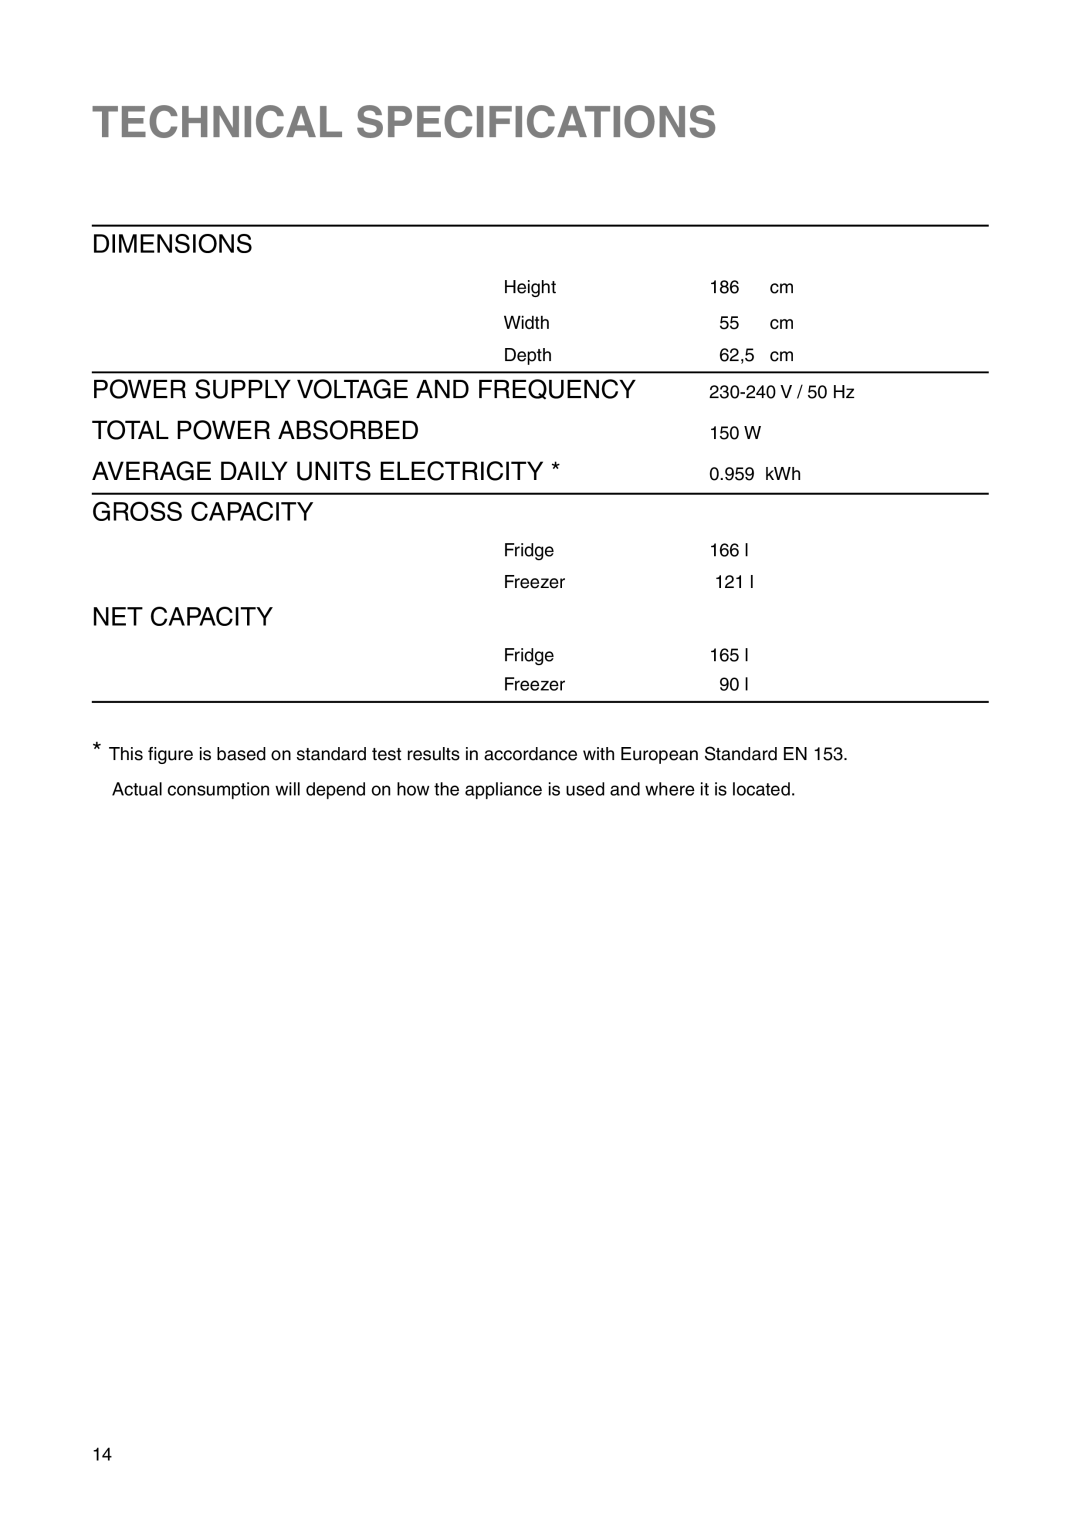 Zanussi ZRB 2925 S manual Technical Specifications, Dimensions, Power Supply Voltage And Frequency, Total Power Absorbed 